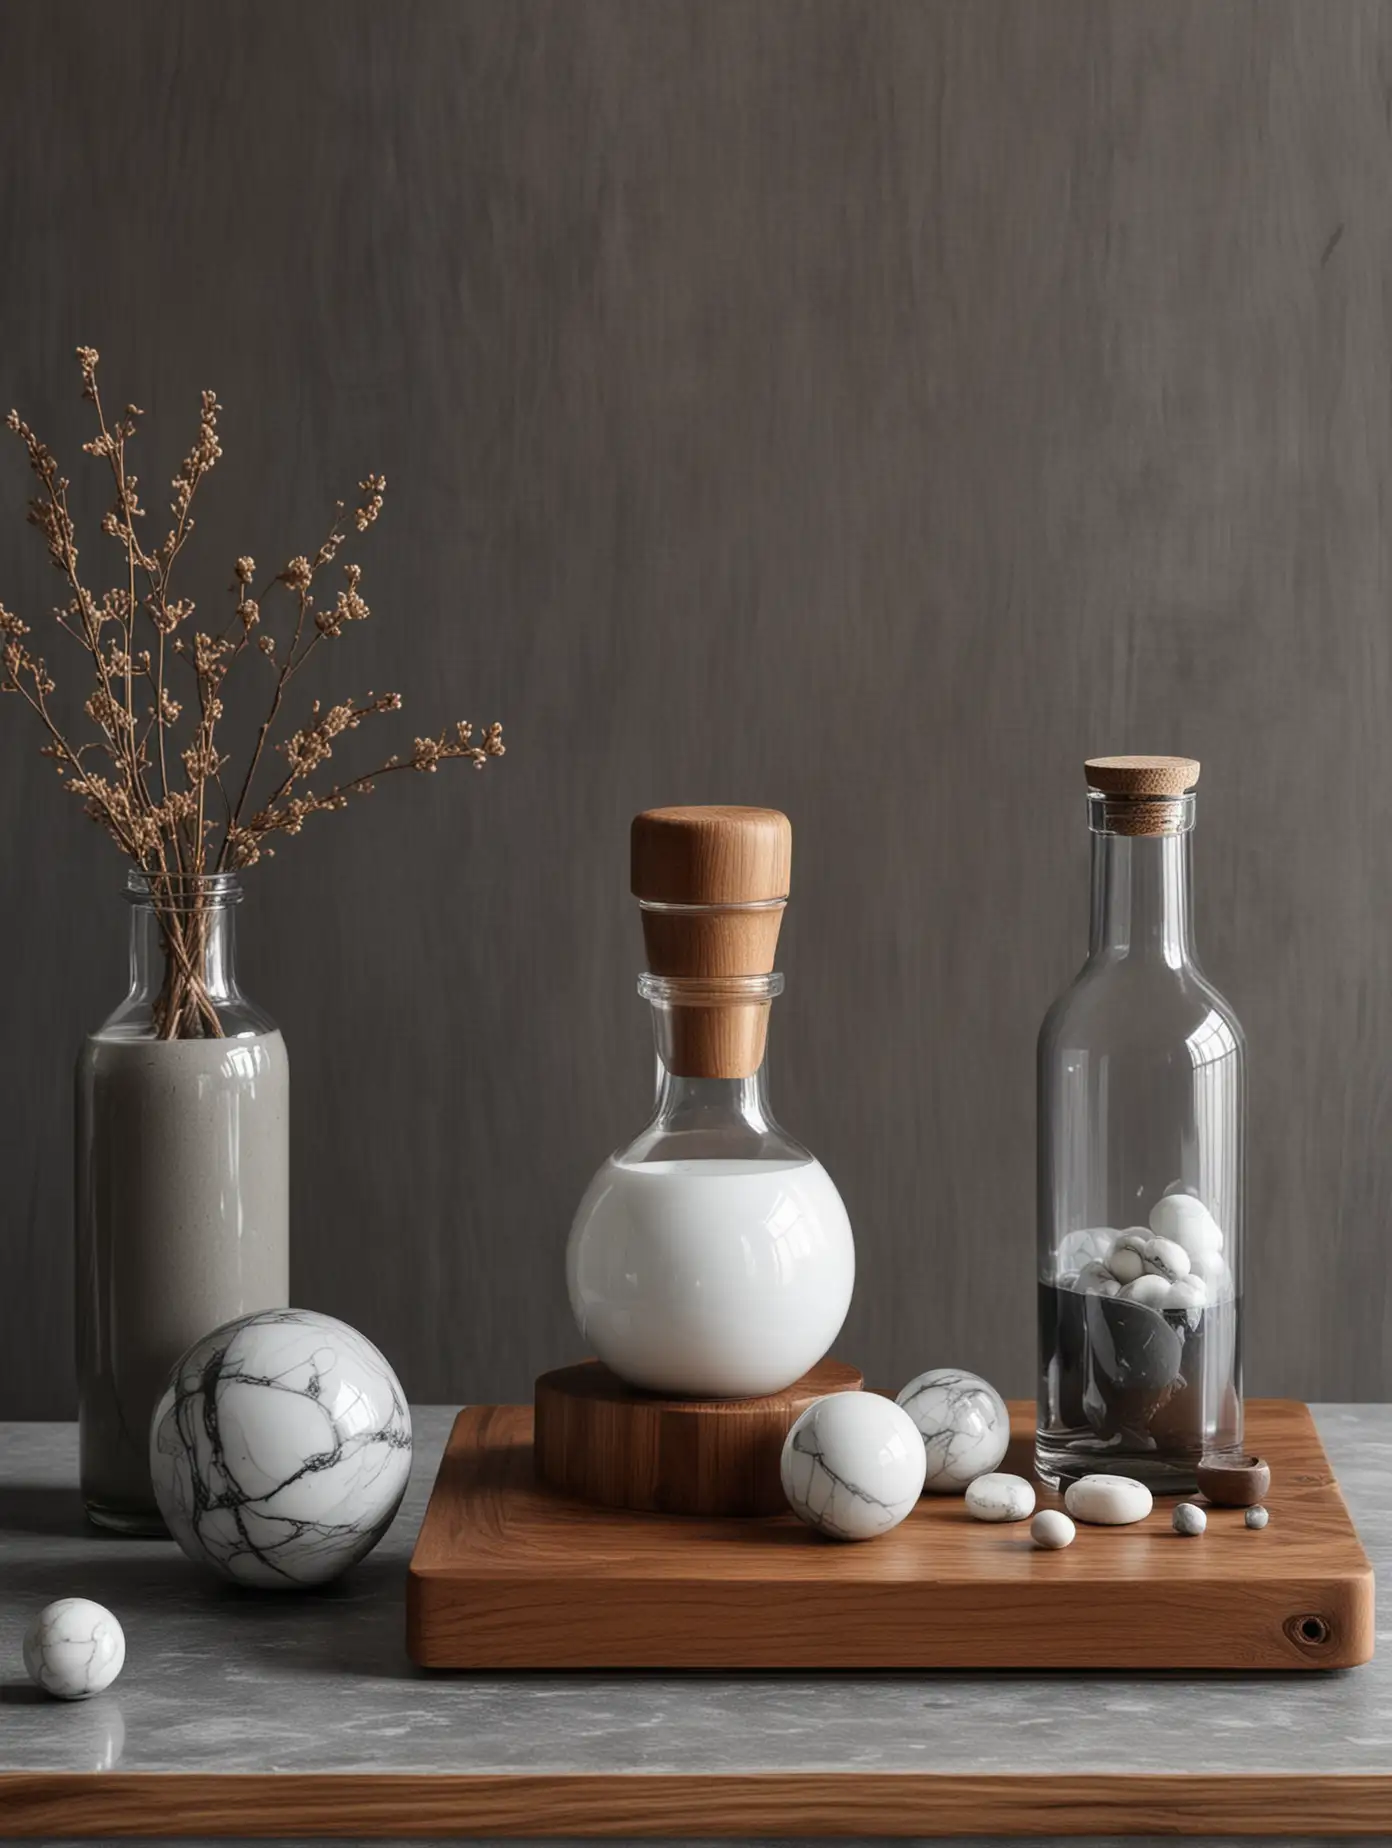 Material collage from interior design, with different materials from the kitchen area, brown solid wood surface, on it standing a glass bottle and a small marble ball in white, natural materials, dark gray and light gray